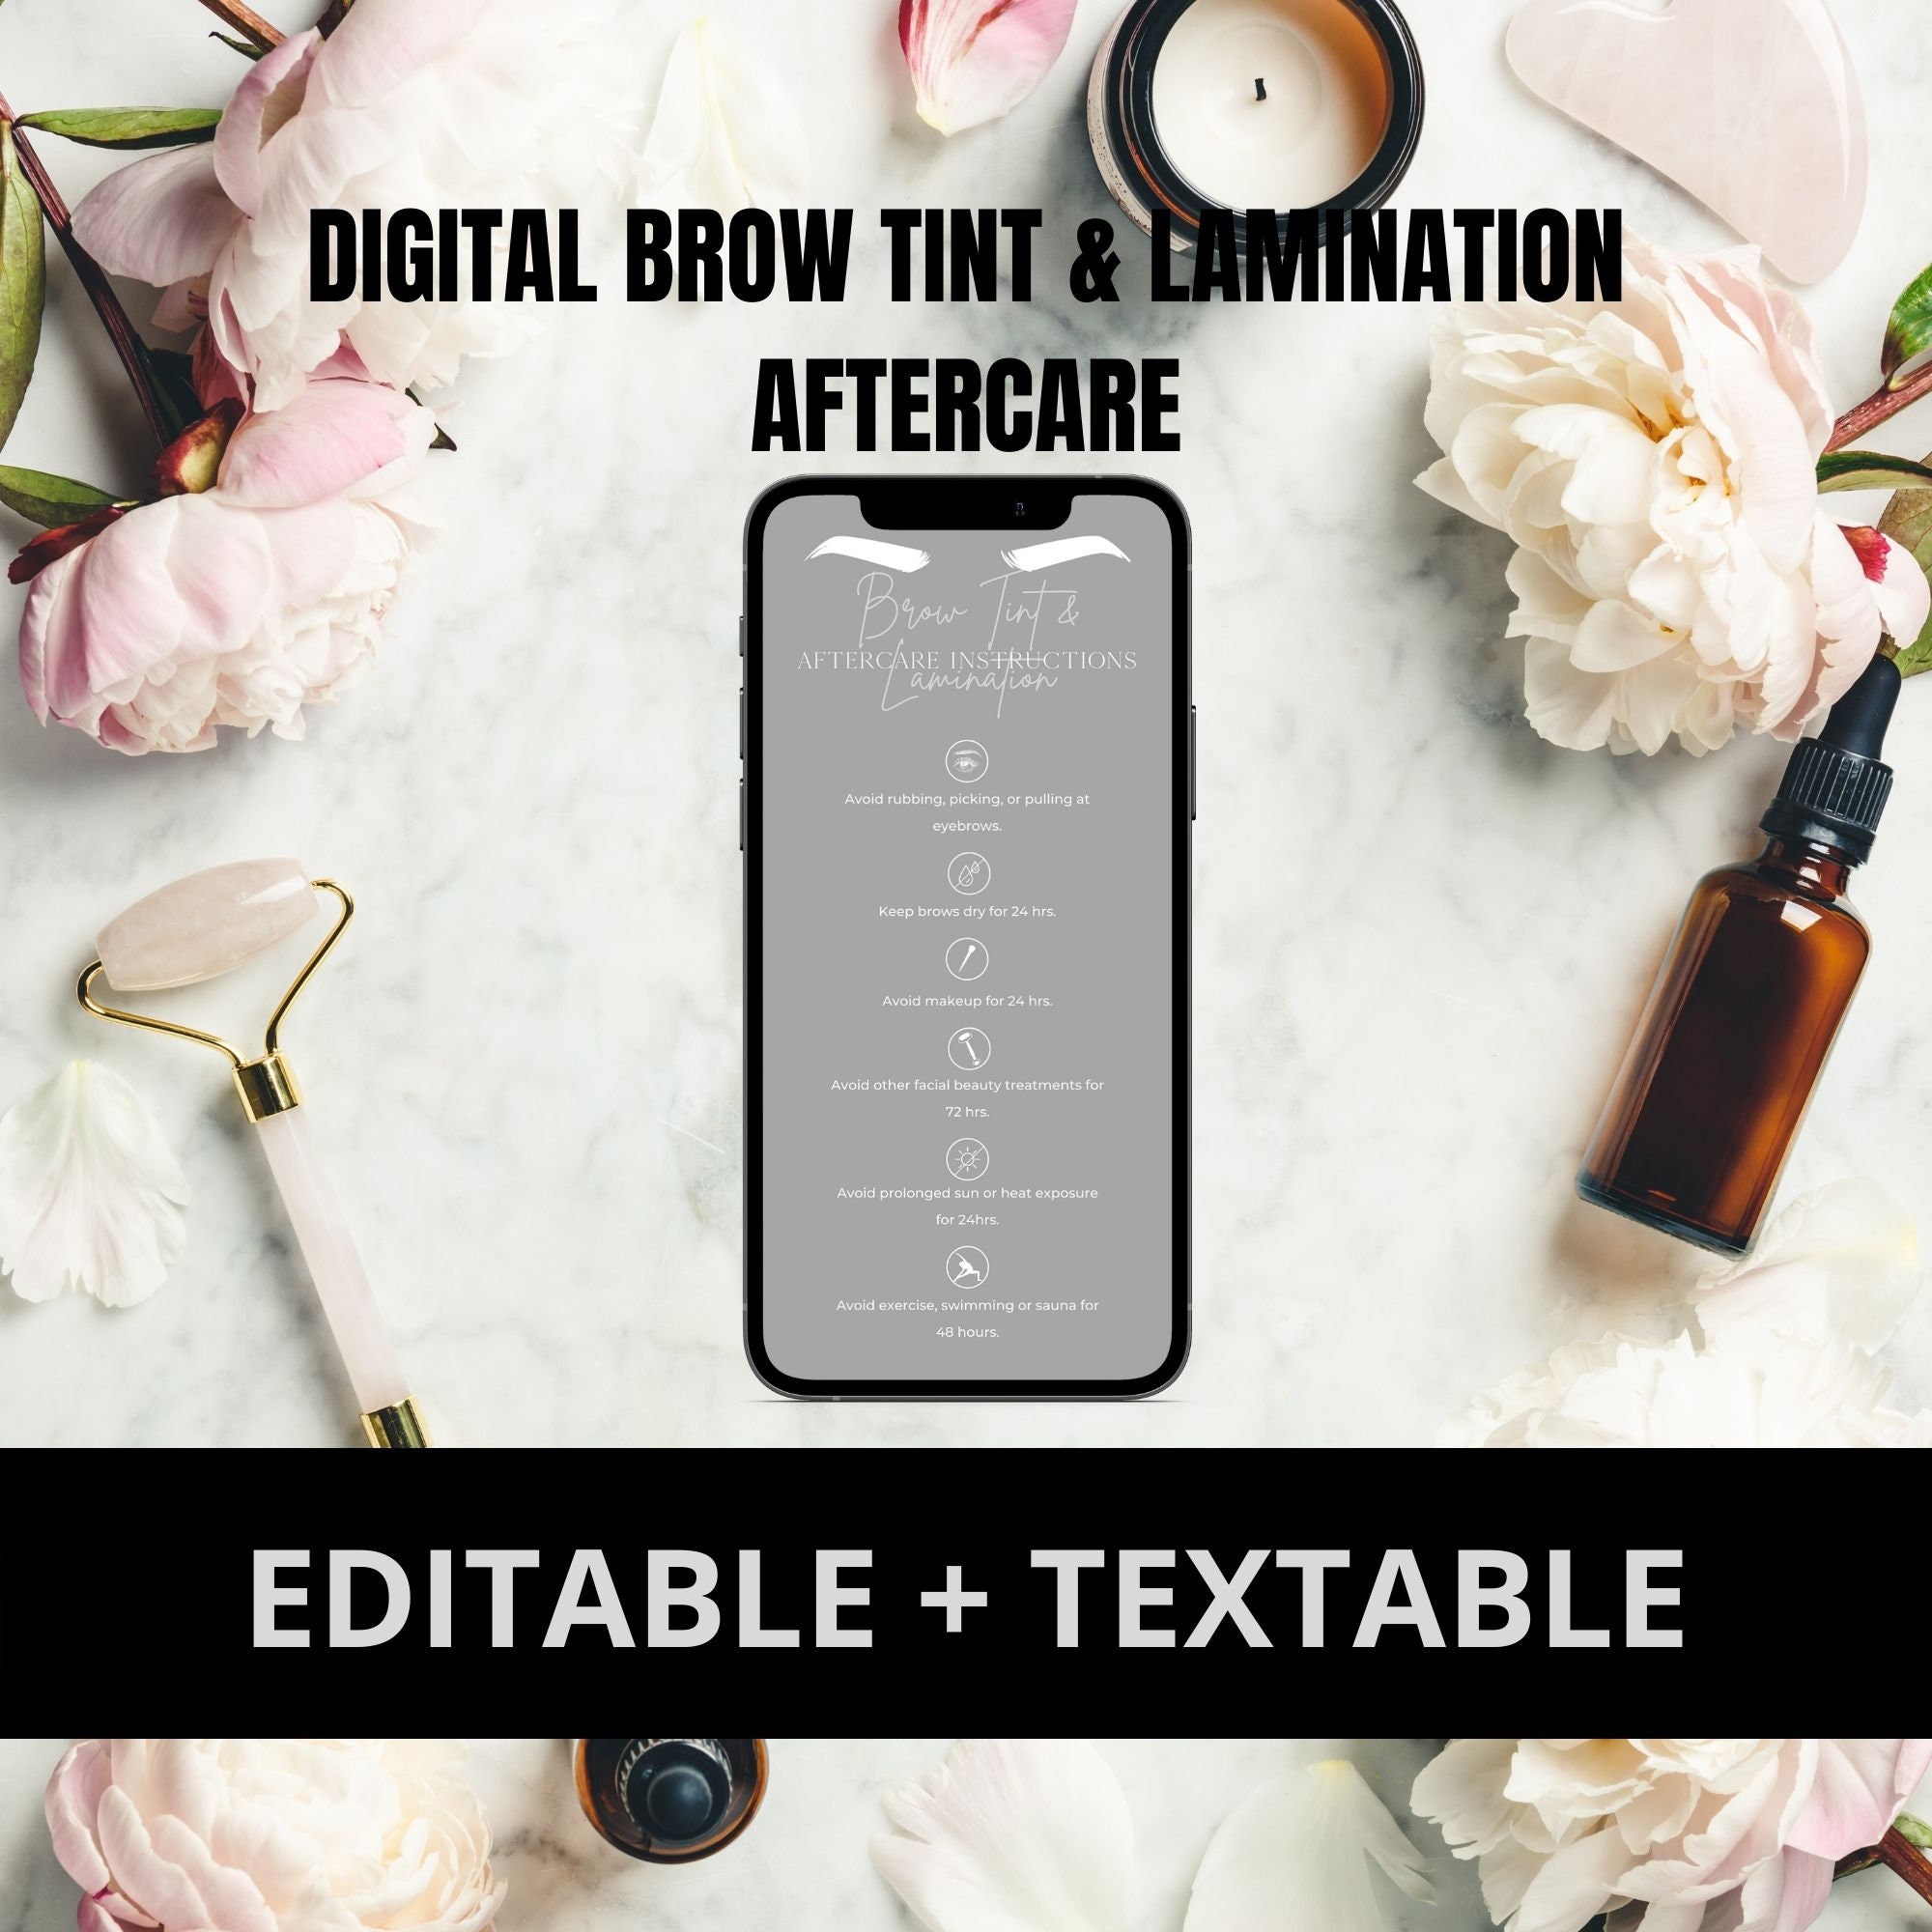 EDITABLE Textable Digital Brow Tint and Lamination Aftercare | Etsy